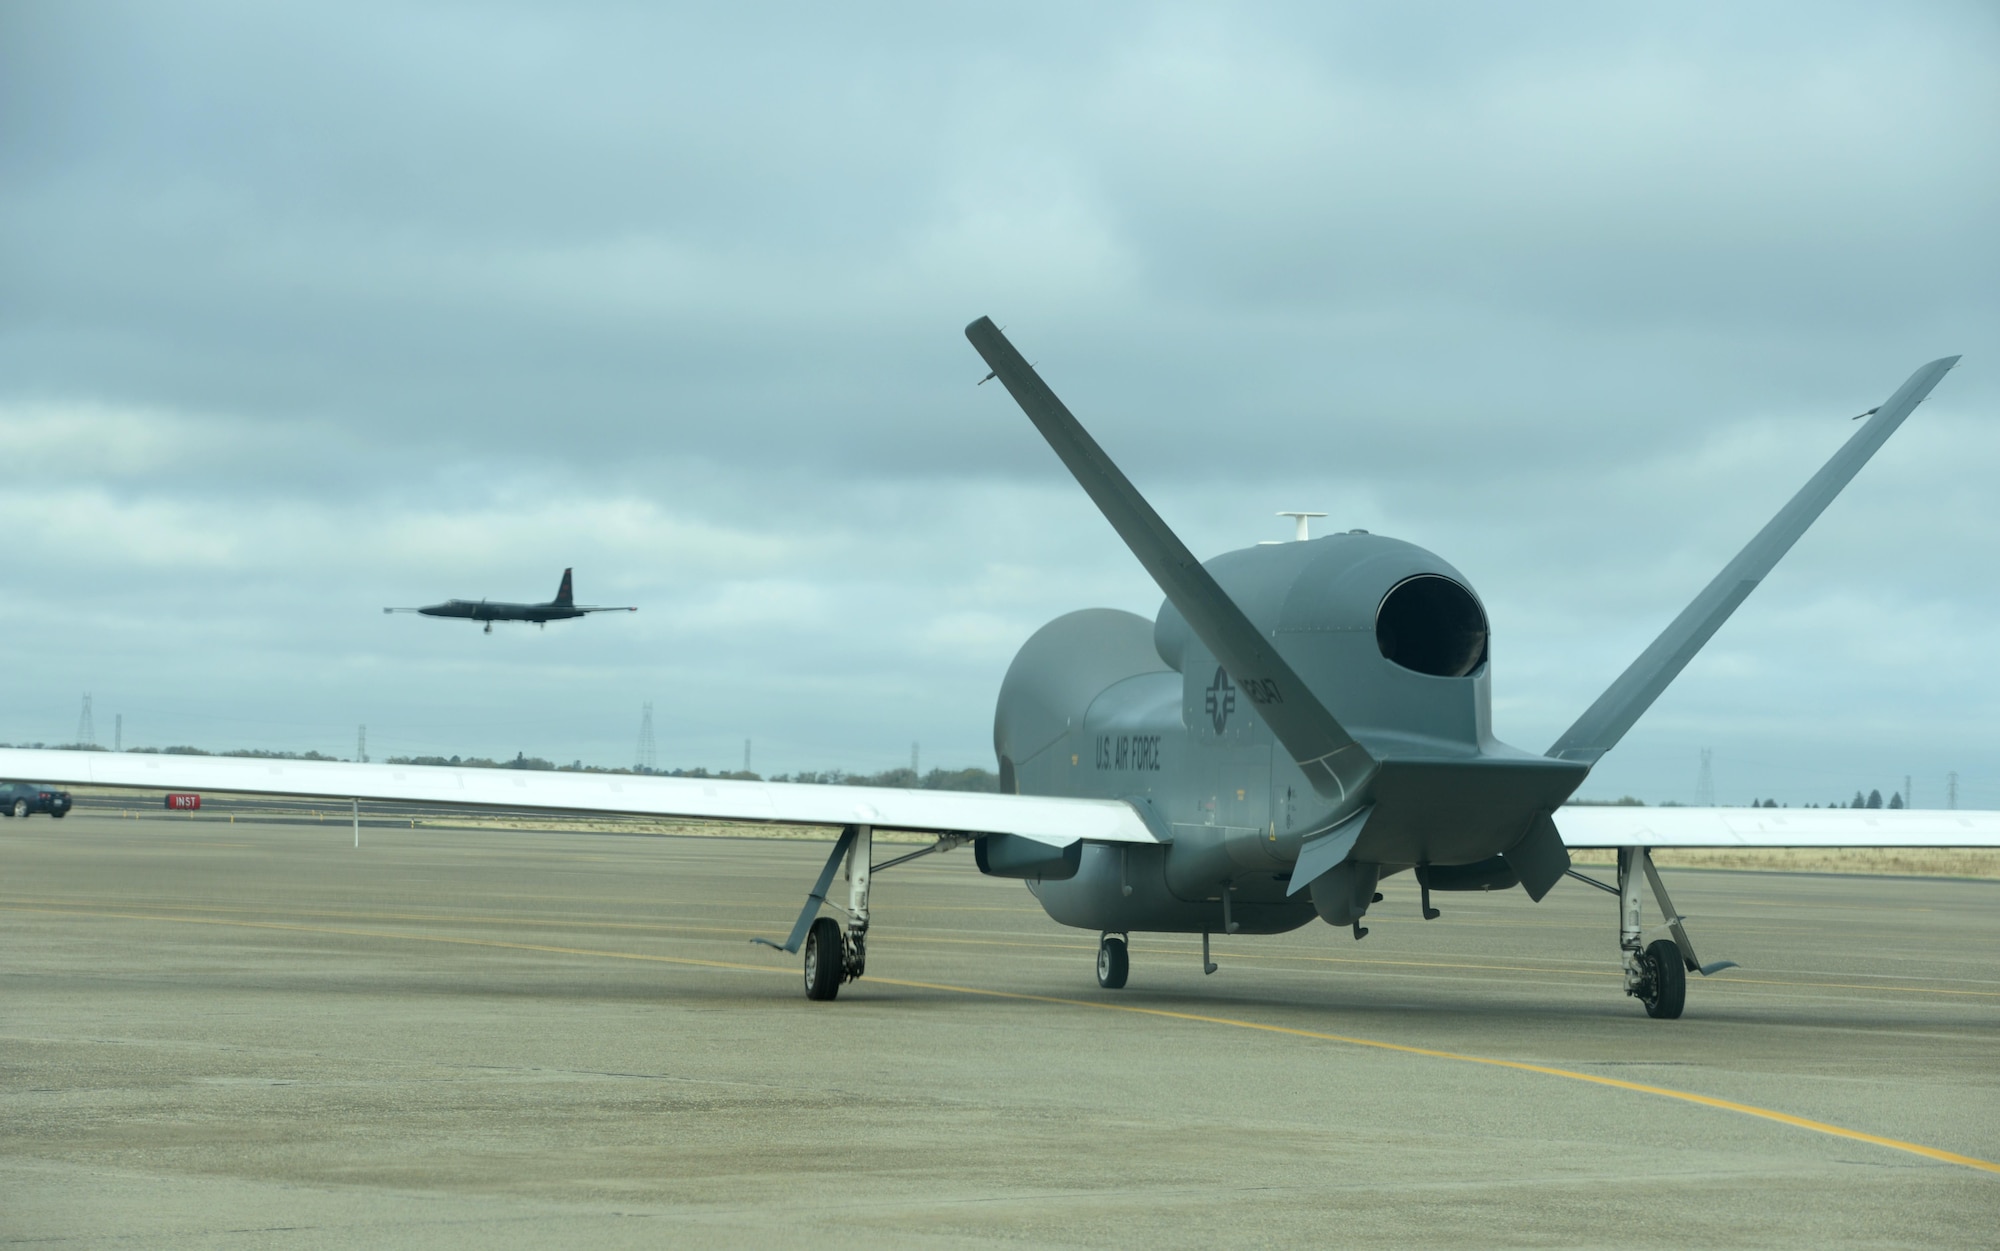 A RQ-4 Global Hawk proceeds down the taxiway prior to departure Nov. 1, 2016, at Beale Air Force Base, California. The RQ-4 Global Hawk is a high-altitude, intelligence, surveillance and reconnaissance, long-endurance, remotely piloted aircraft. (U.S. Air Force photo/Staff Sgt. Bobby Cummings)